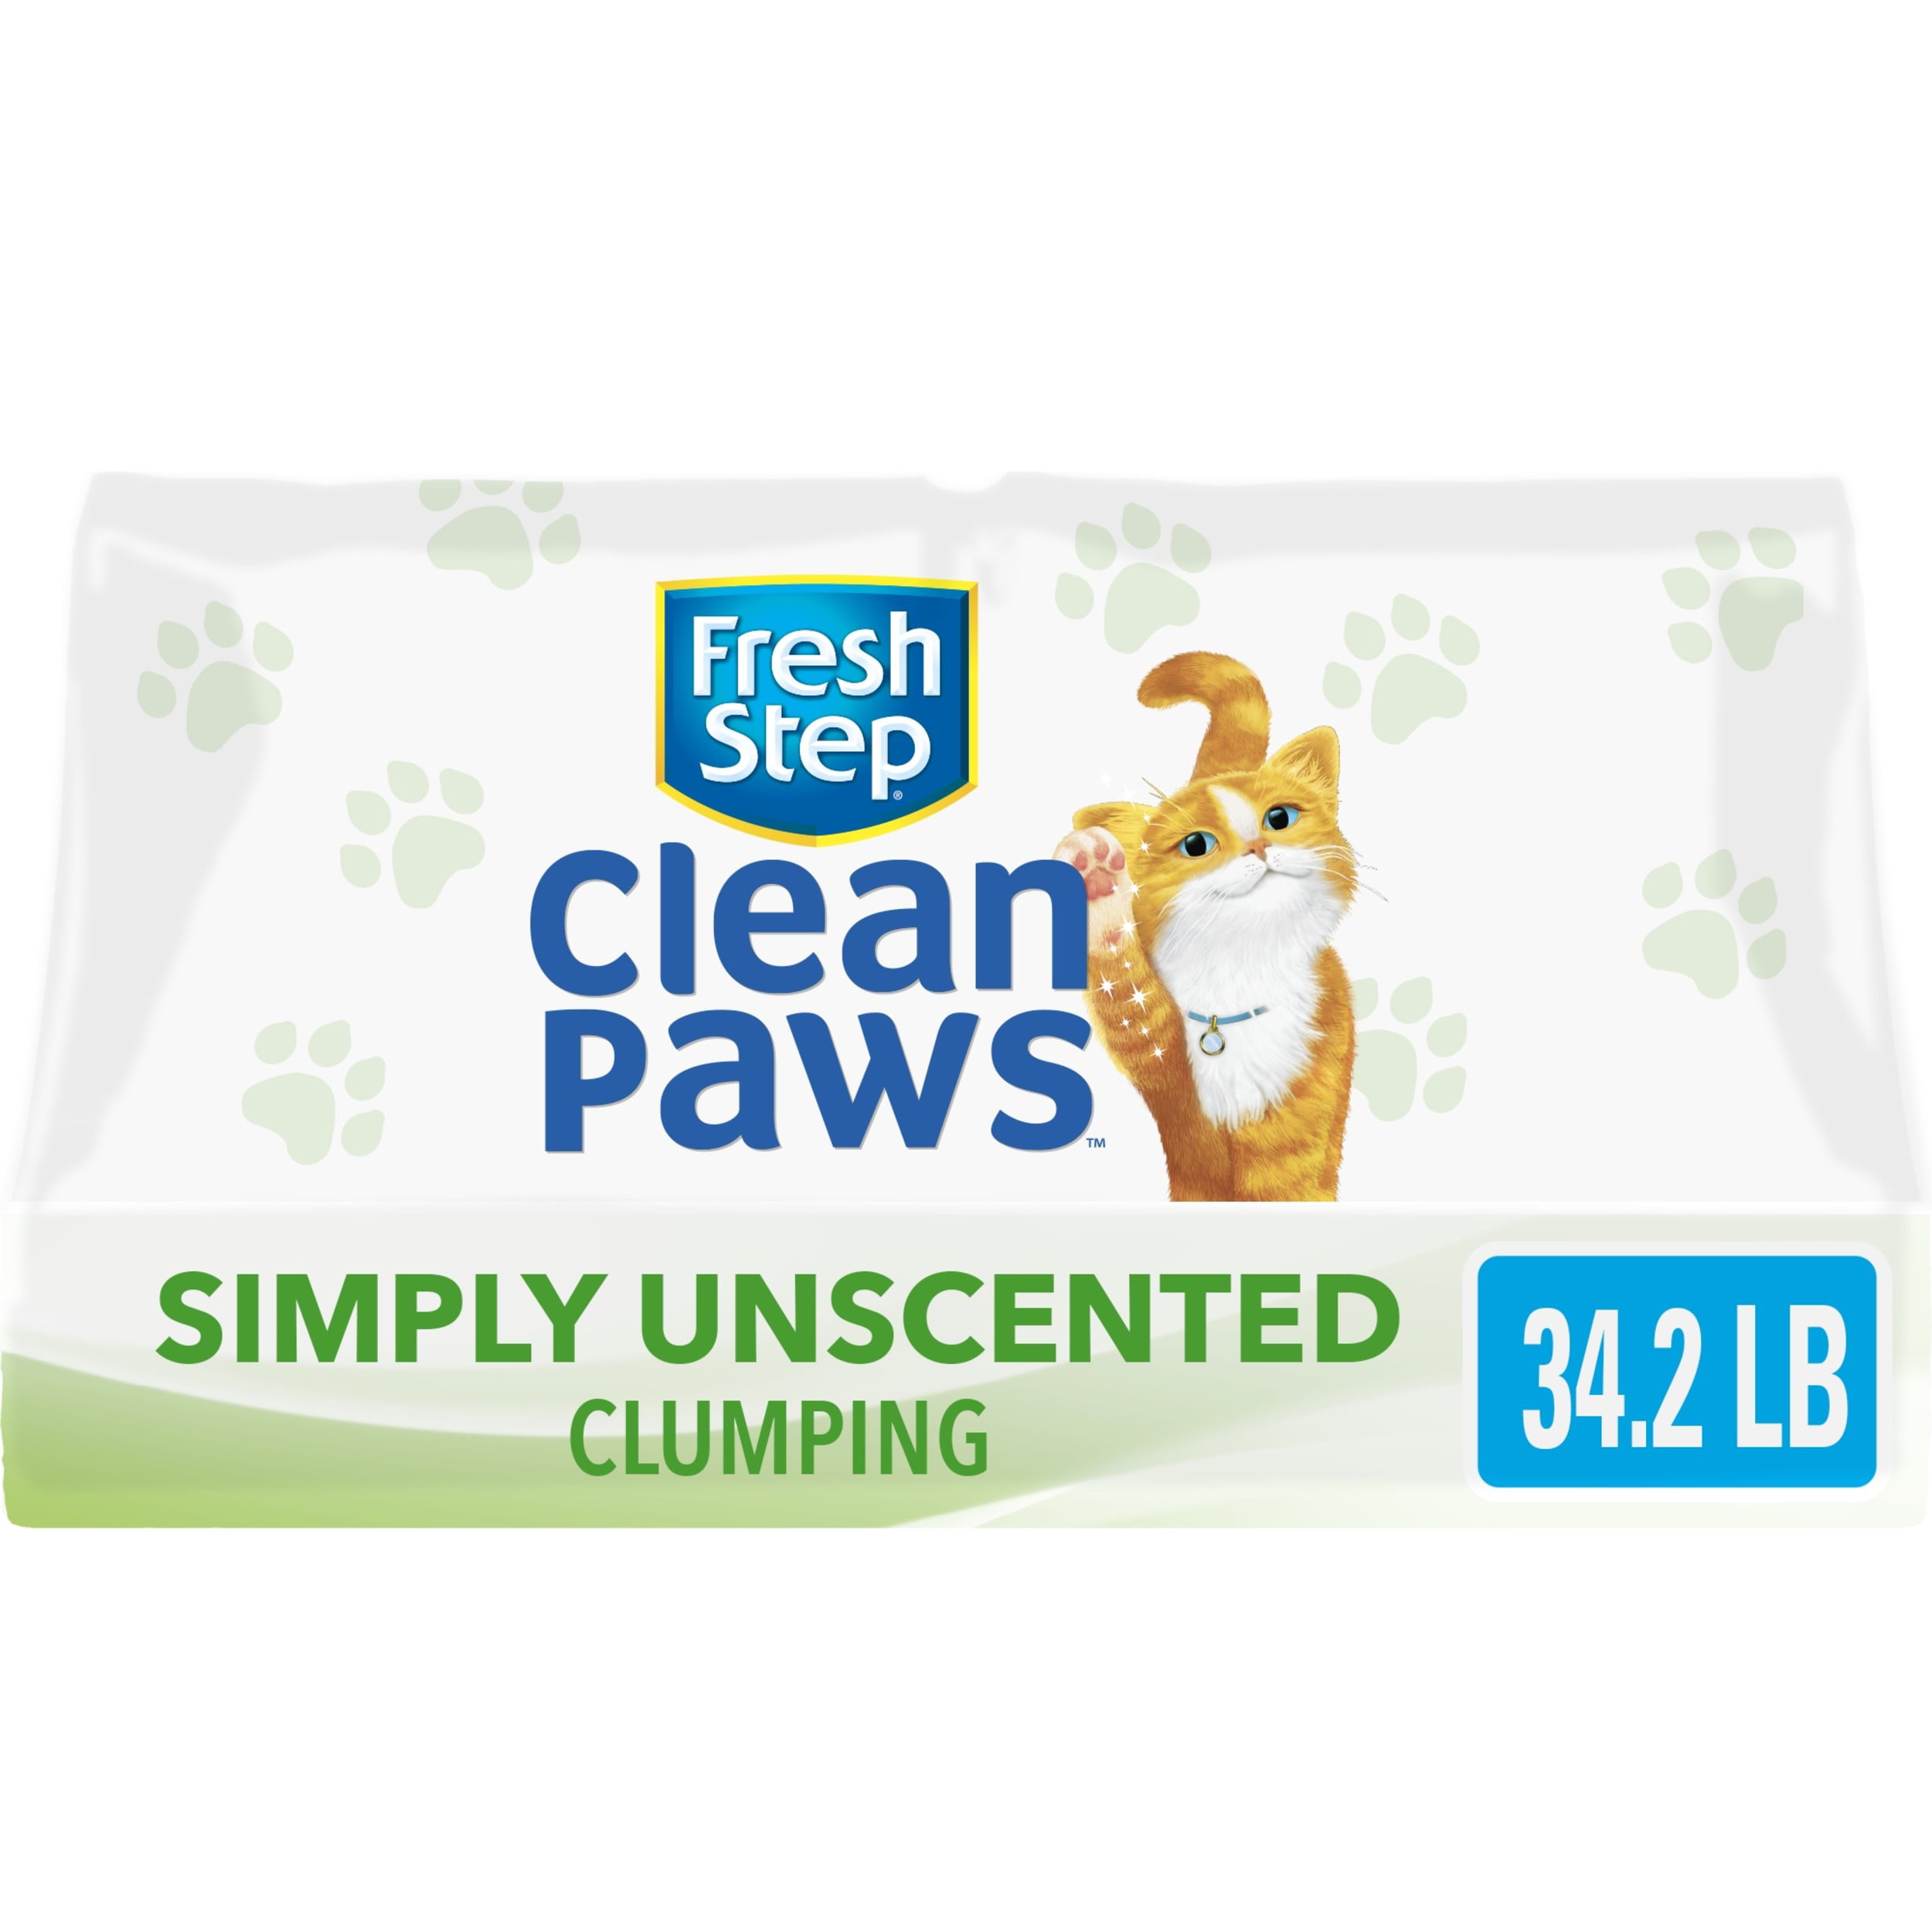 Fresh Step Clean Paws Simply Unscented Clumping Cat Litter 34.2